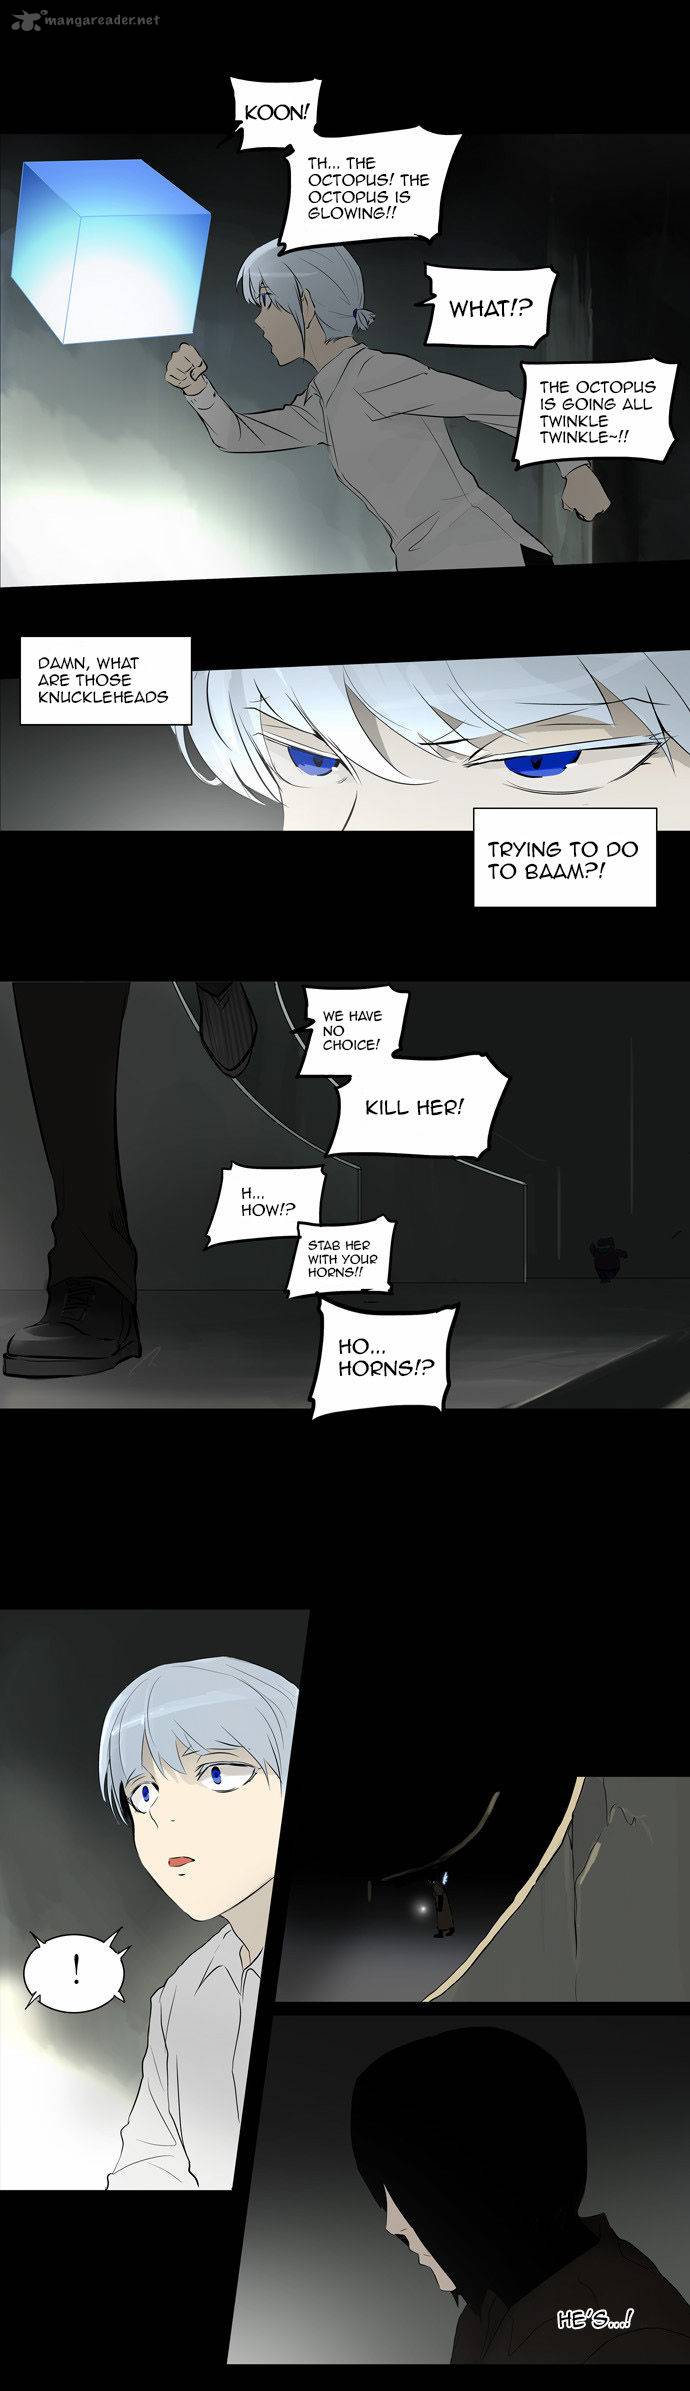 Tower Of God 144 10